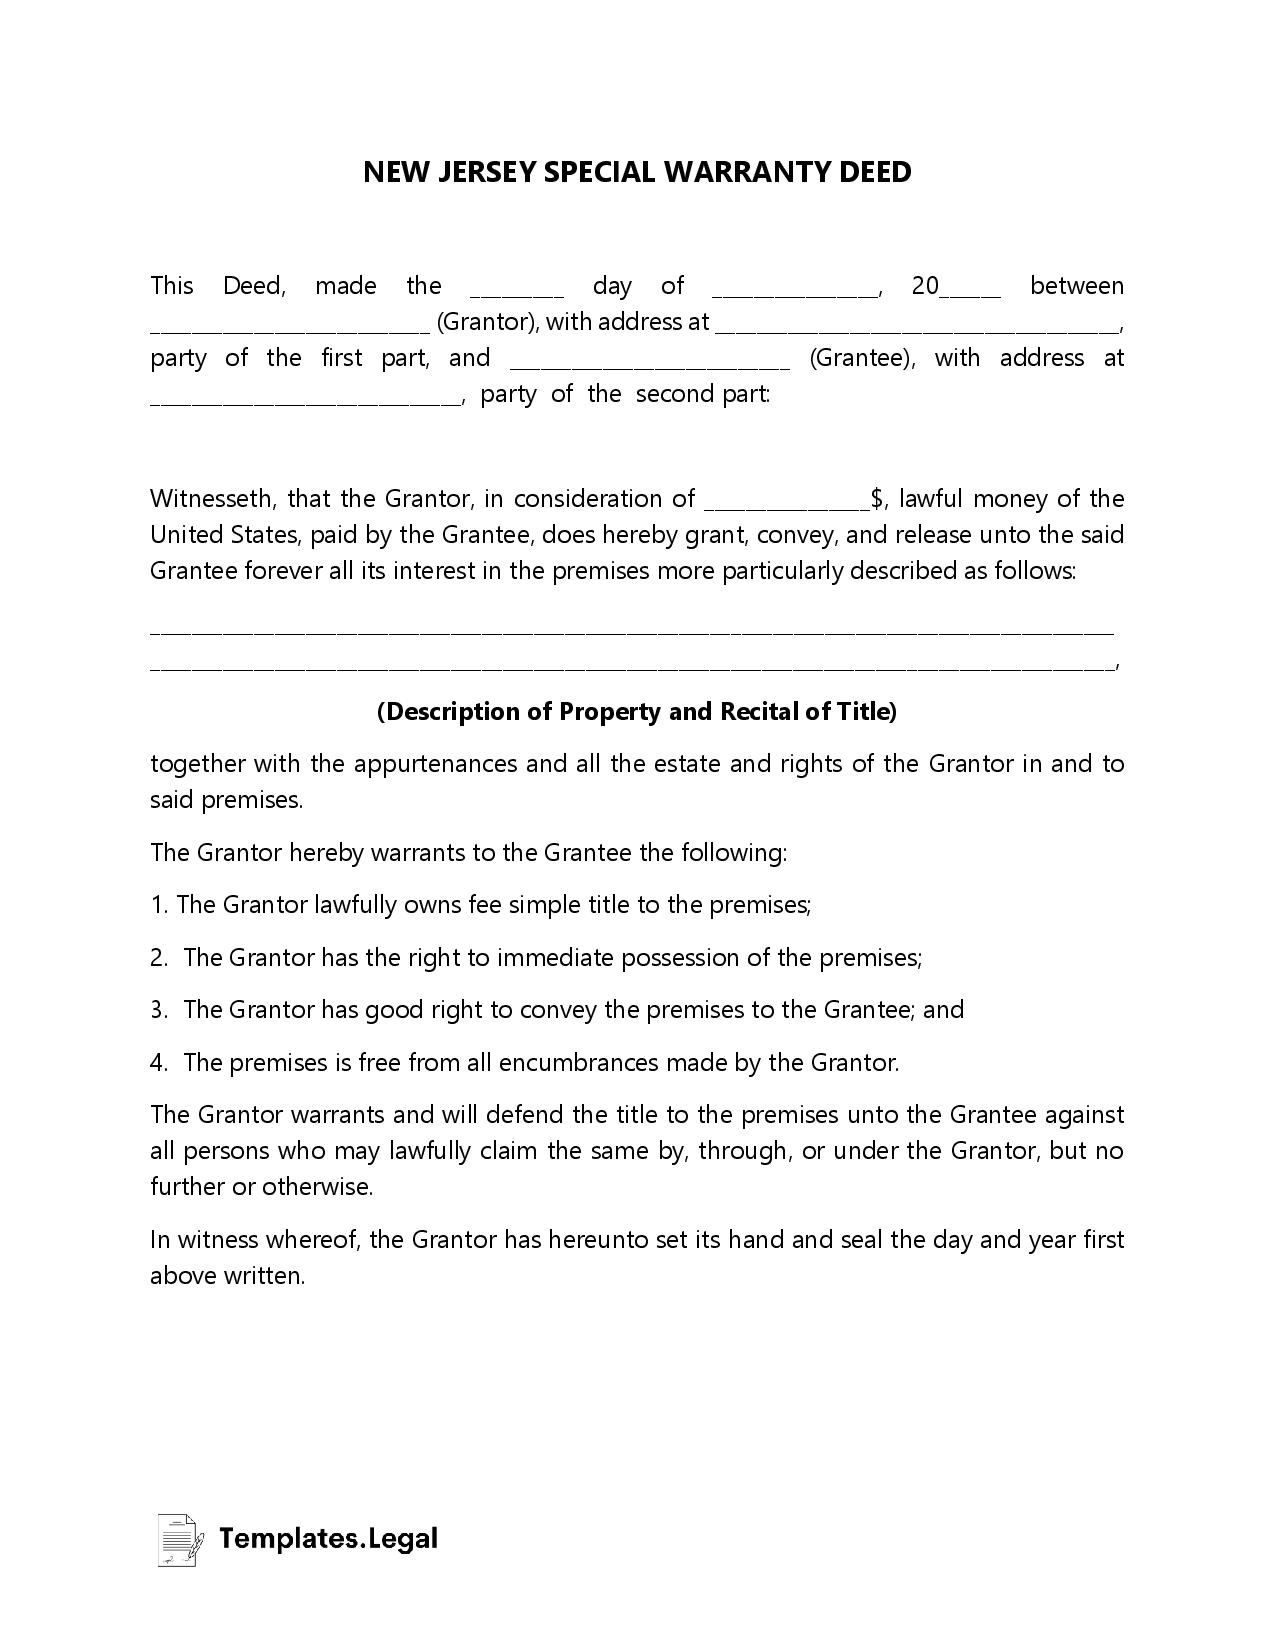 New Jersey Special Warranty Deed - Templates.Legal